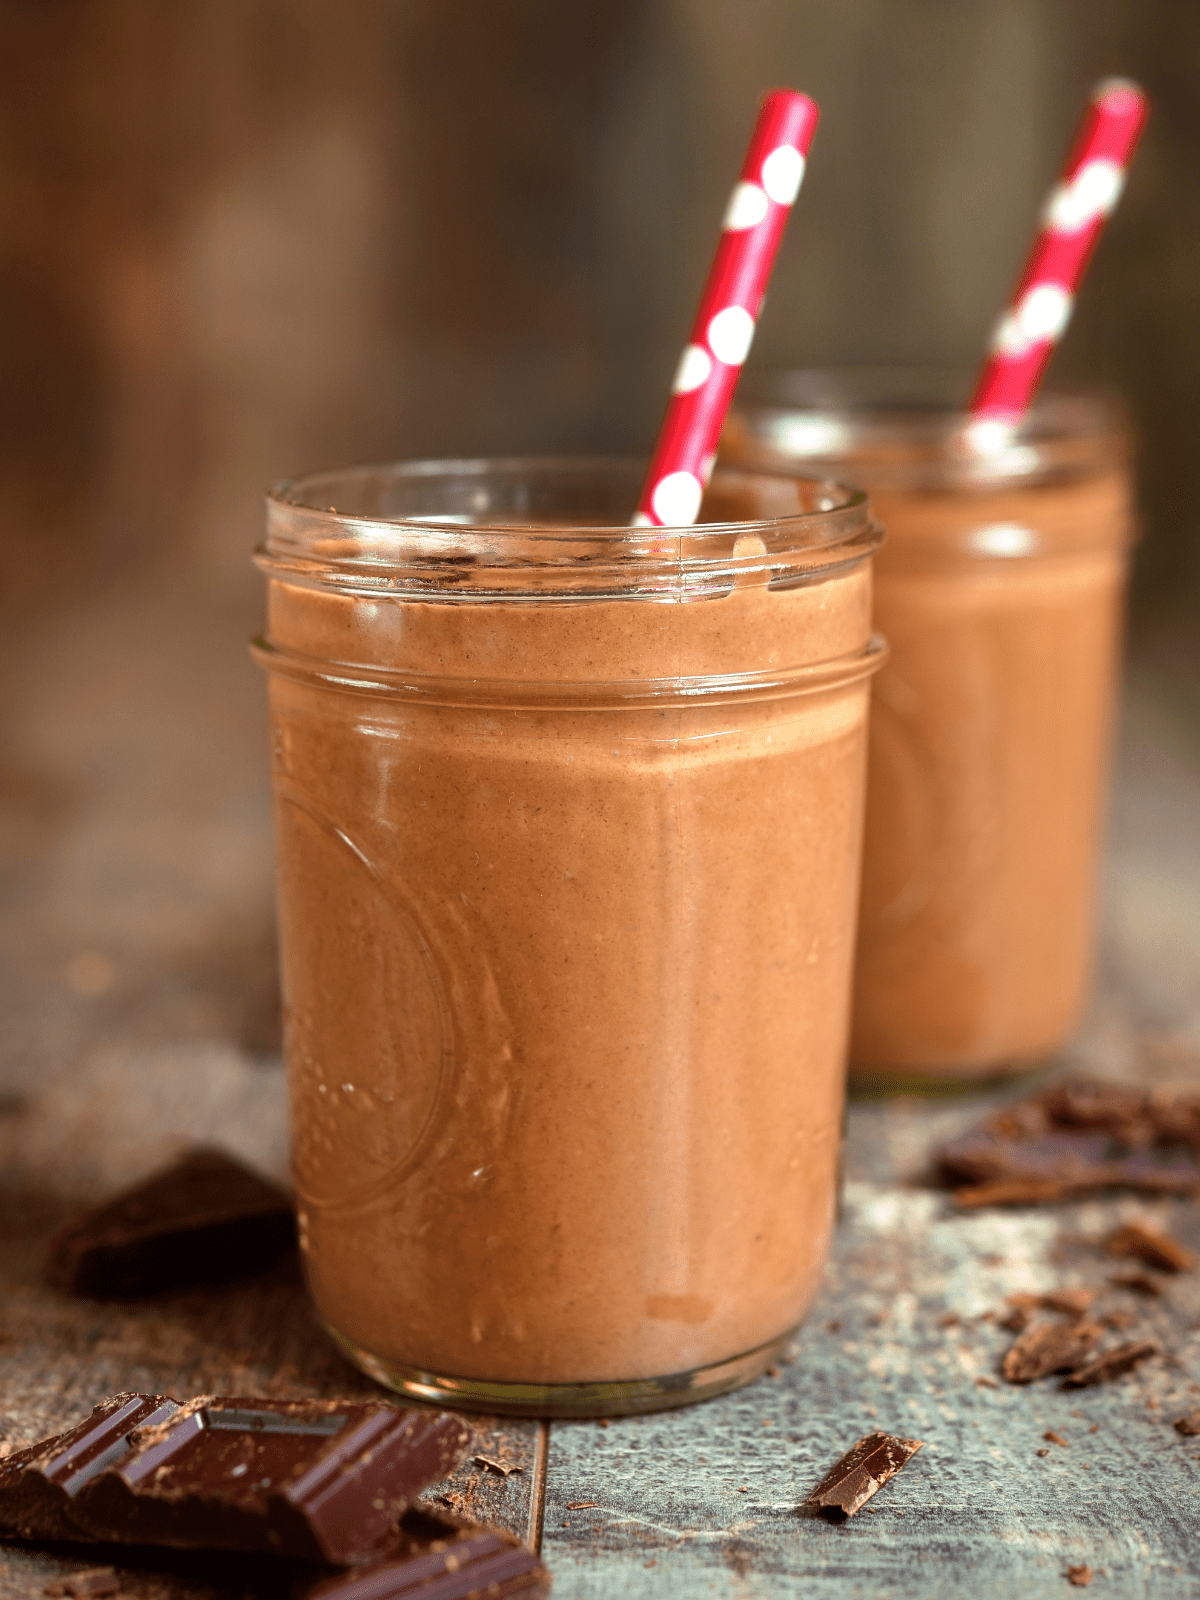 Chocolate smoothie in 2 glass cups with straws.